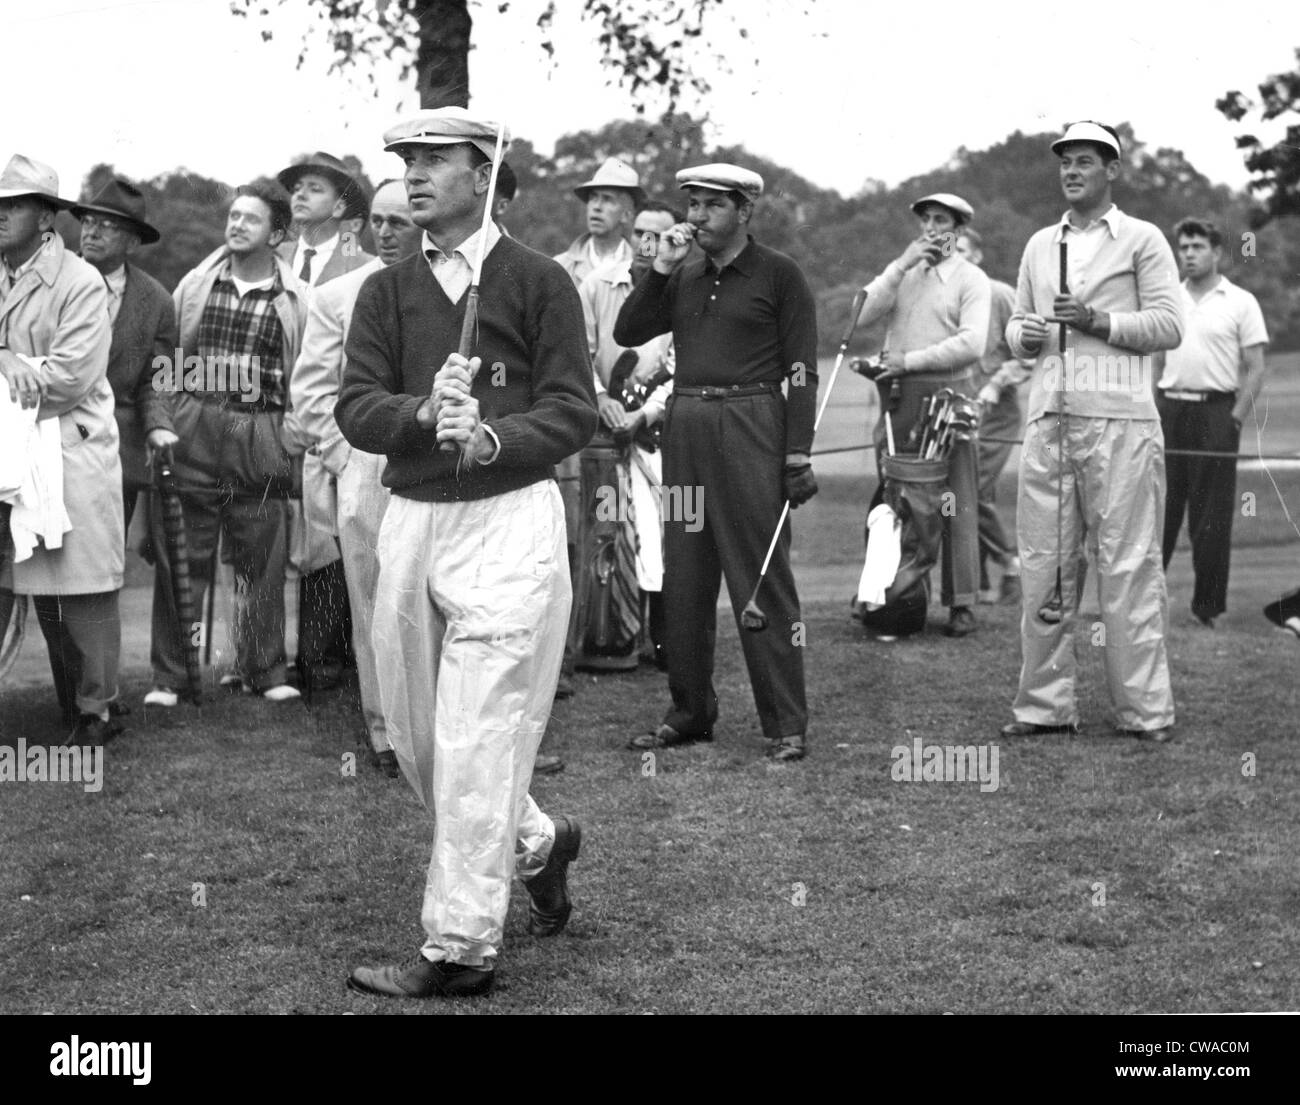 Ben Hogan takes practice shot in New Rochelle, NY, 06-14-50 after coming back from near death auto accident the year before.. Stock Photo